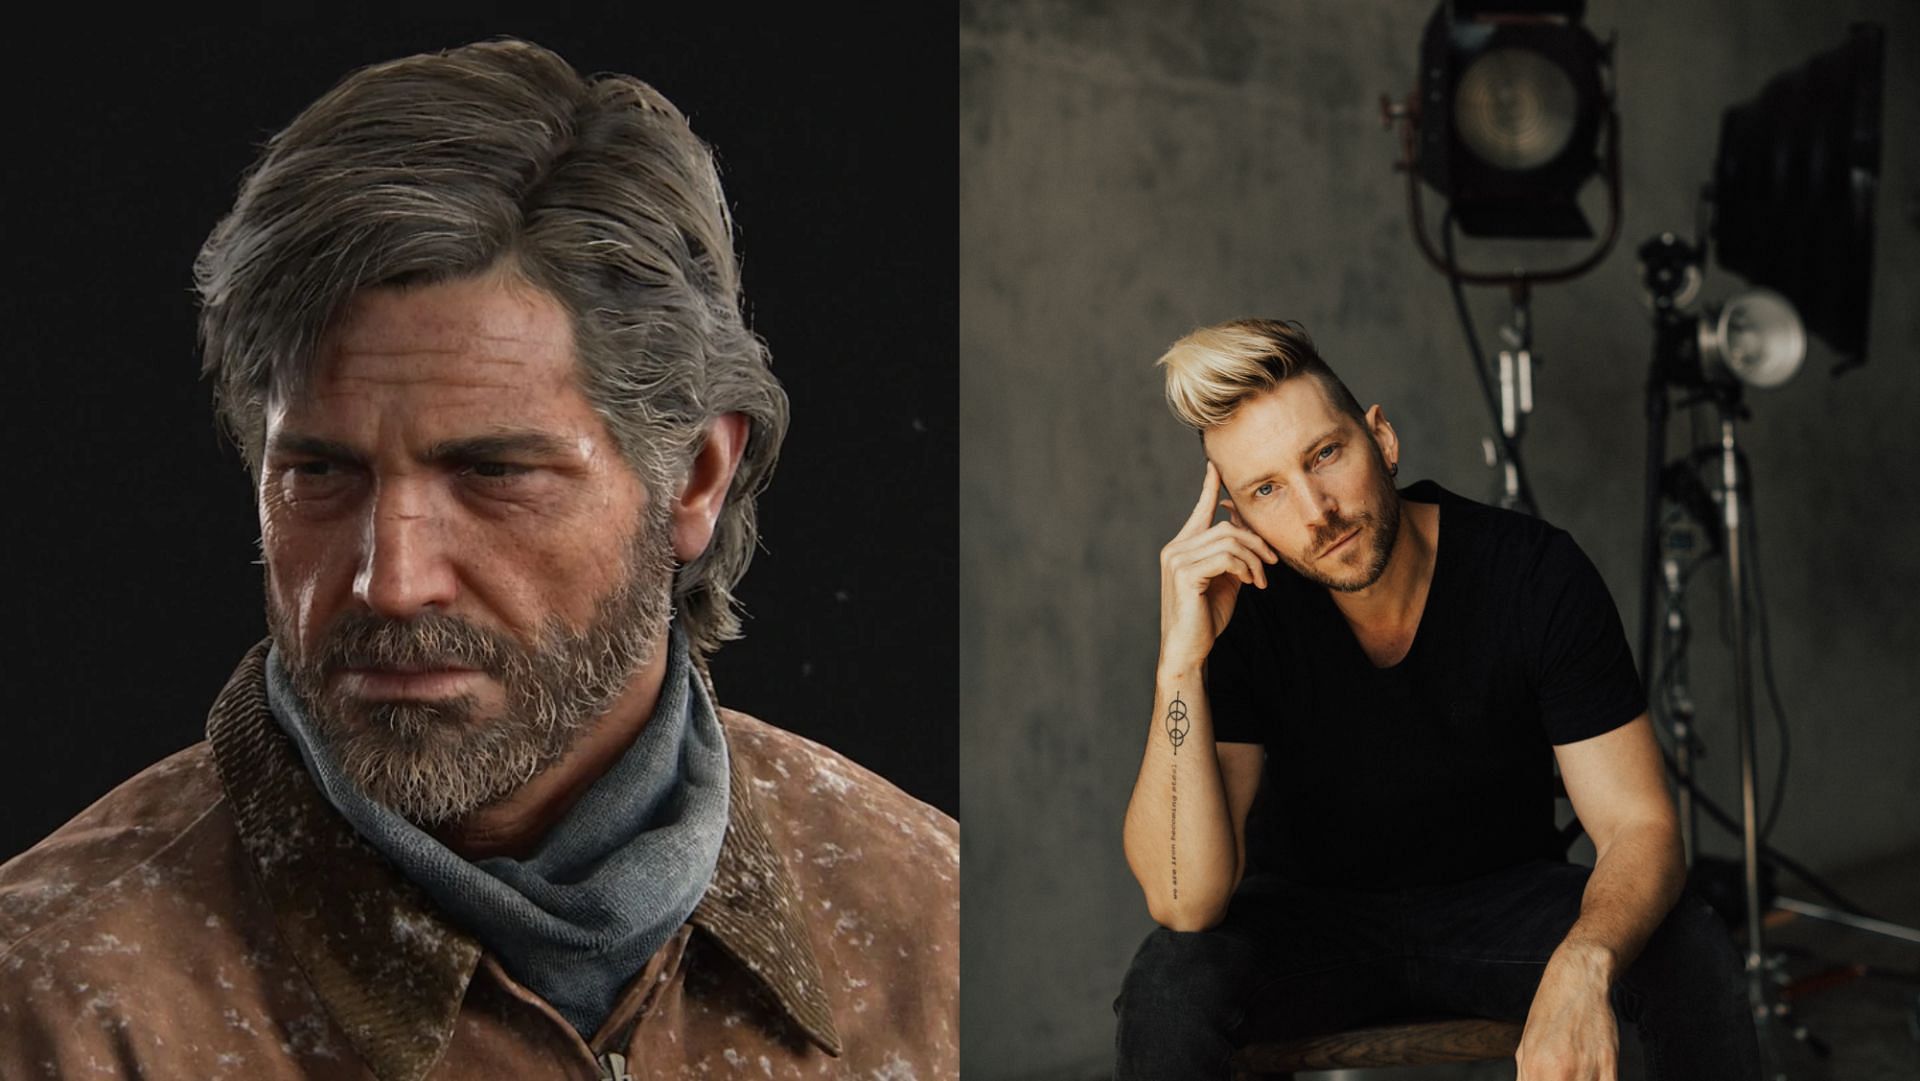 Troy Baker as an older Joel in the sequel (Image via IMDB and TLOU Wiki)